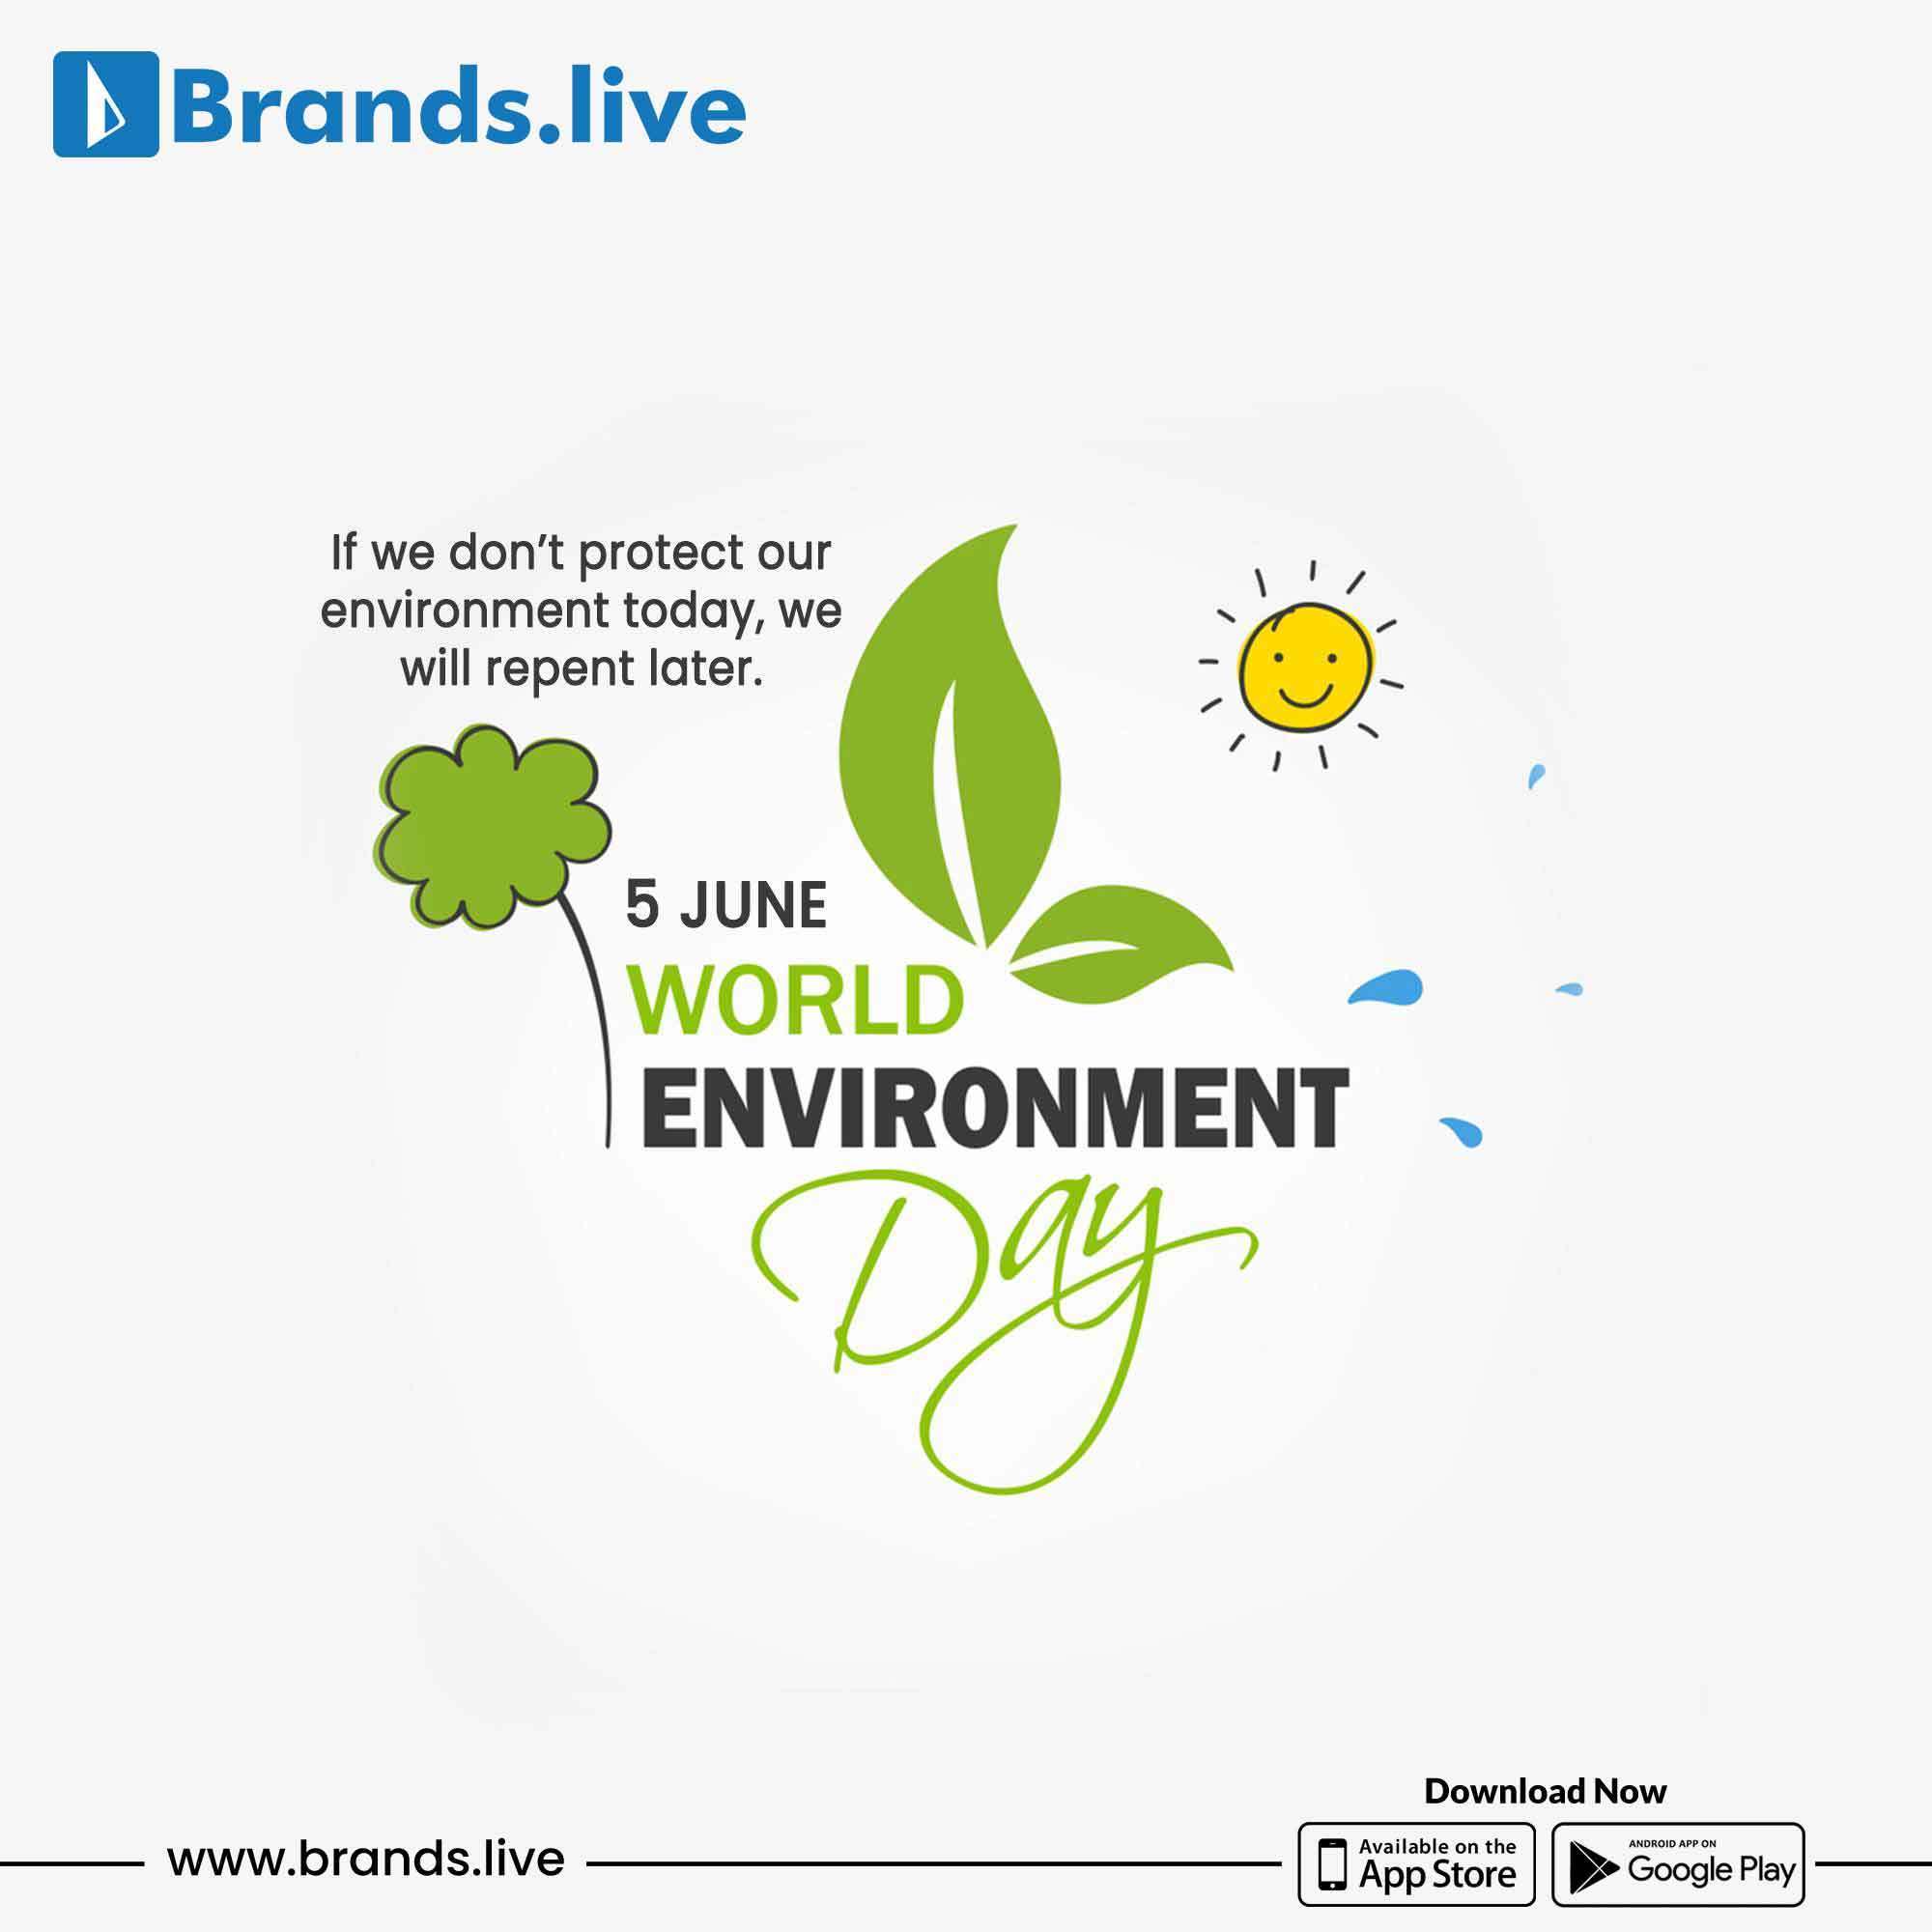 World Environment Day Captivating Images, Meaningful Posts and videos to share on social media